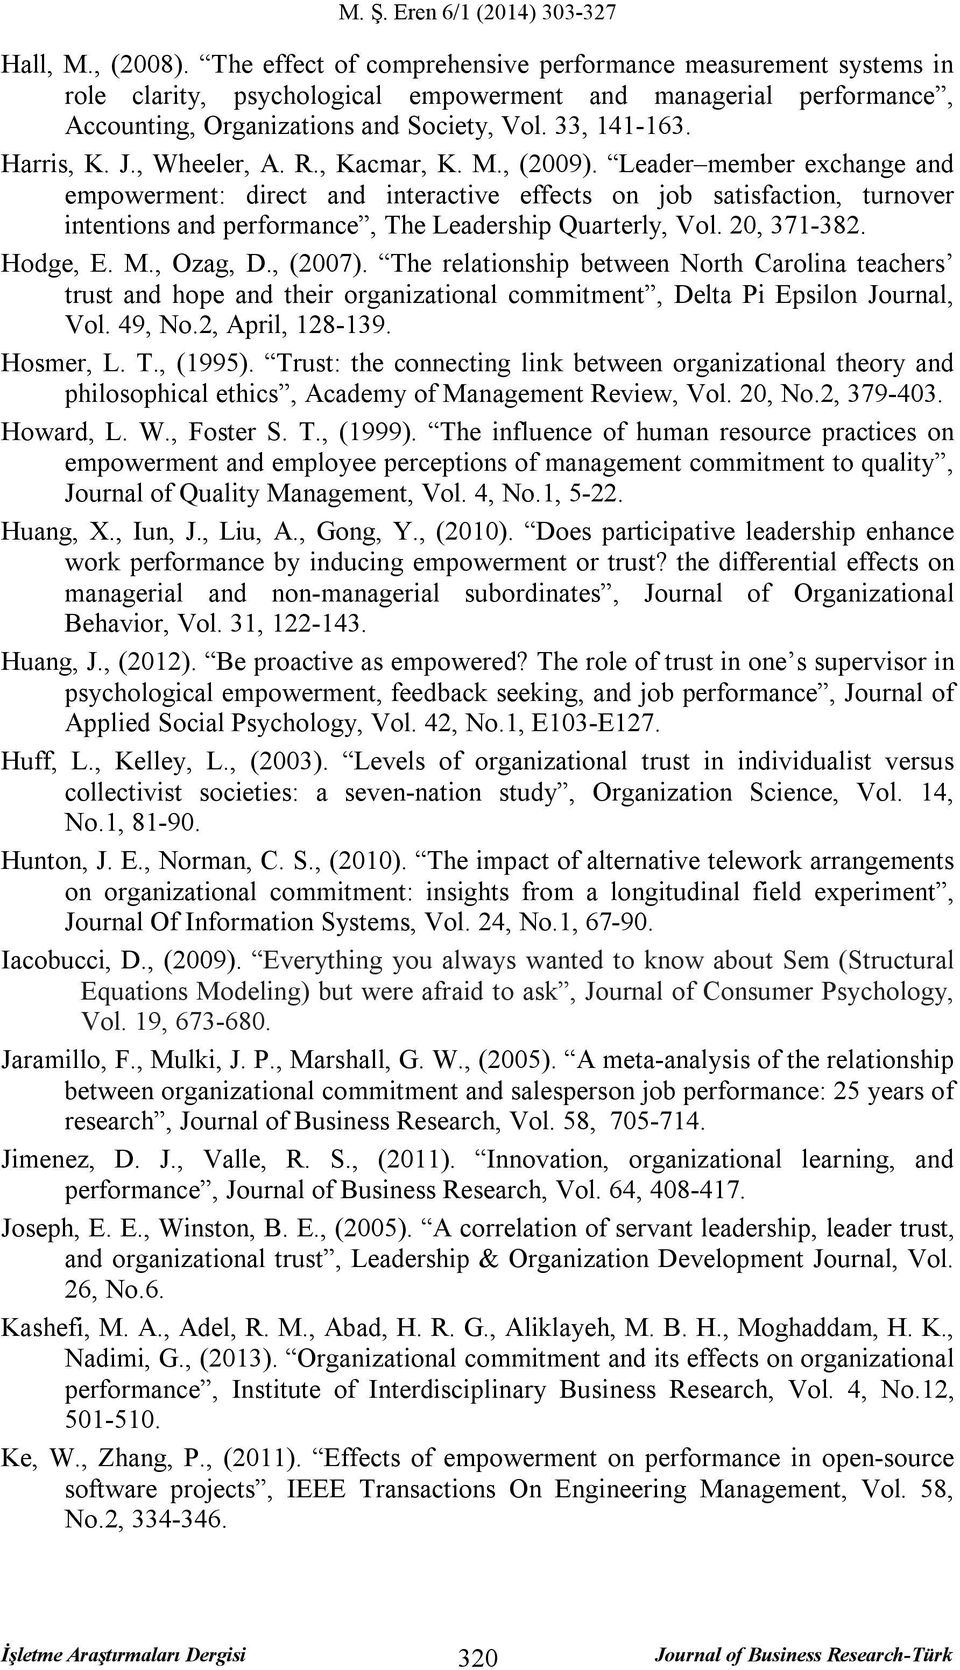 Leader member exchange and empowerment: direct and interactive effects on job satisfaction, turnover intentions and performance, The Leadership Quarterly, Vol. 20, 371-382. Hodge, E. M., Ozag, D.